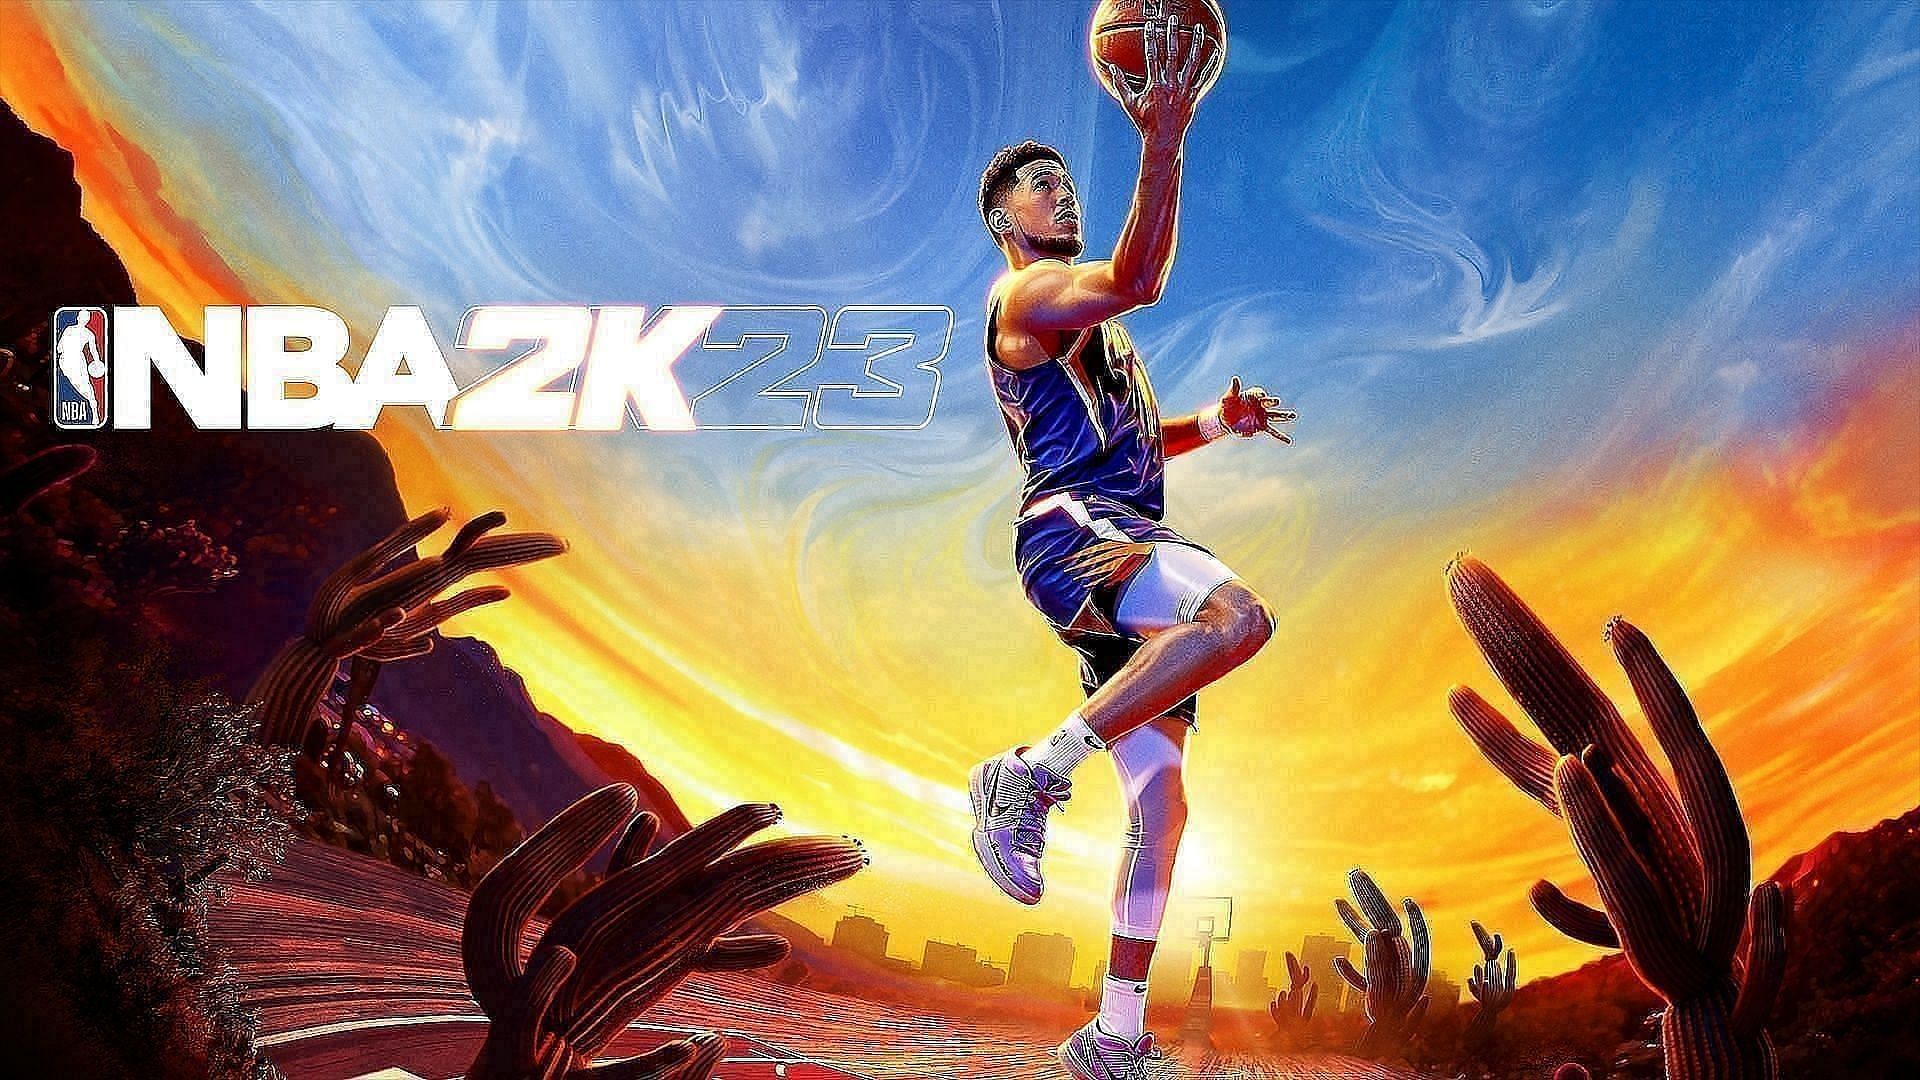 NBA 2K23 is set to be released on September 9th.